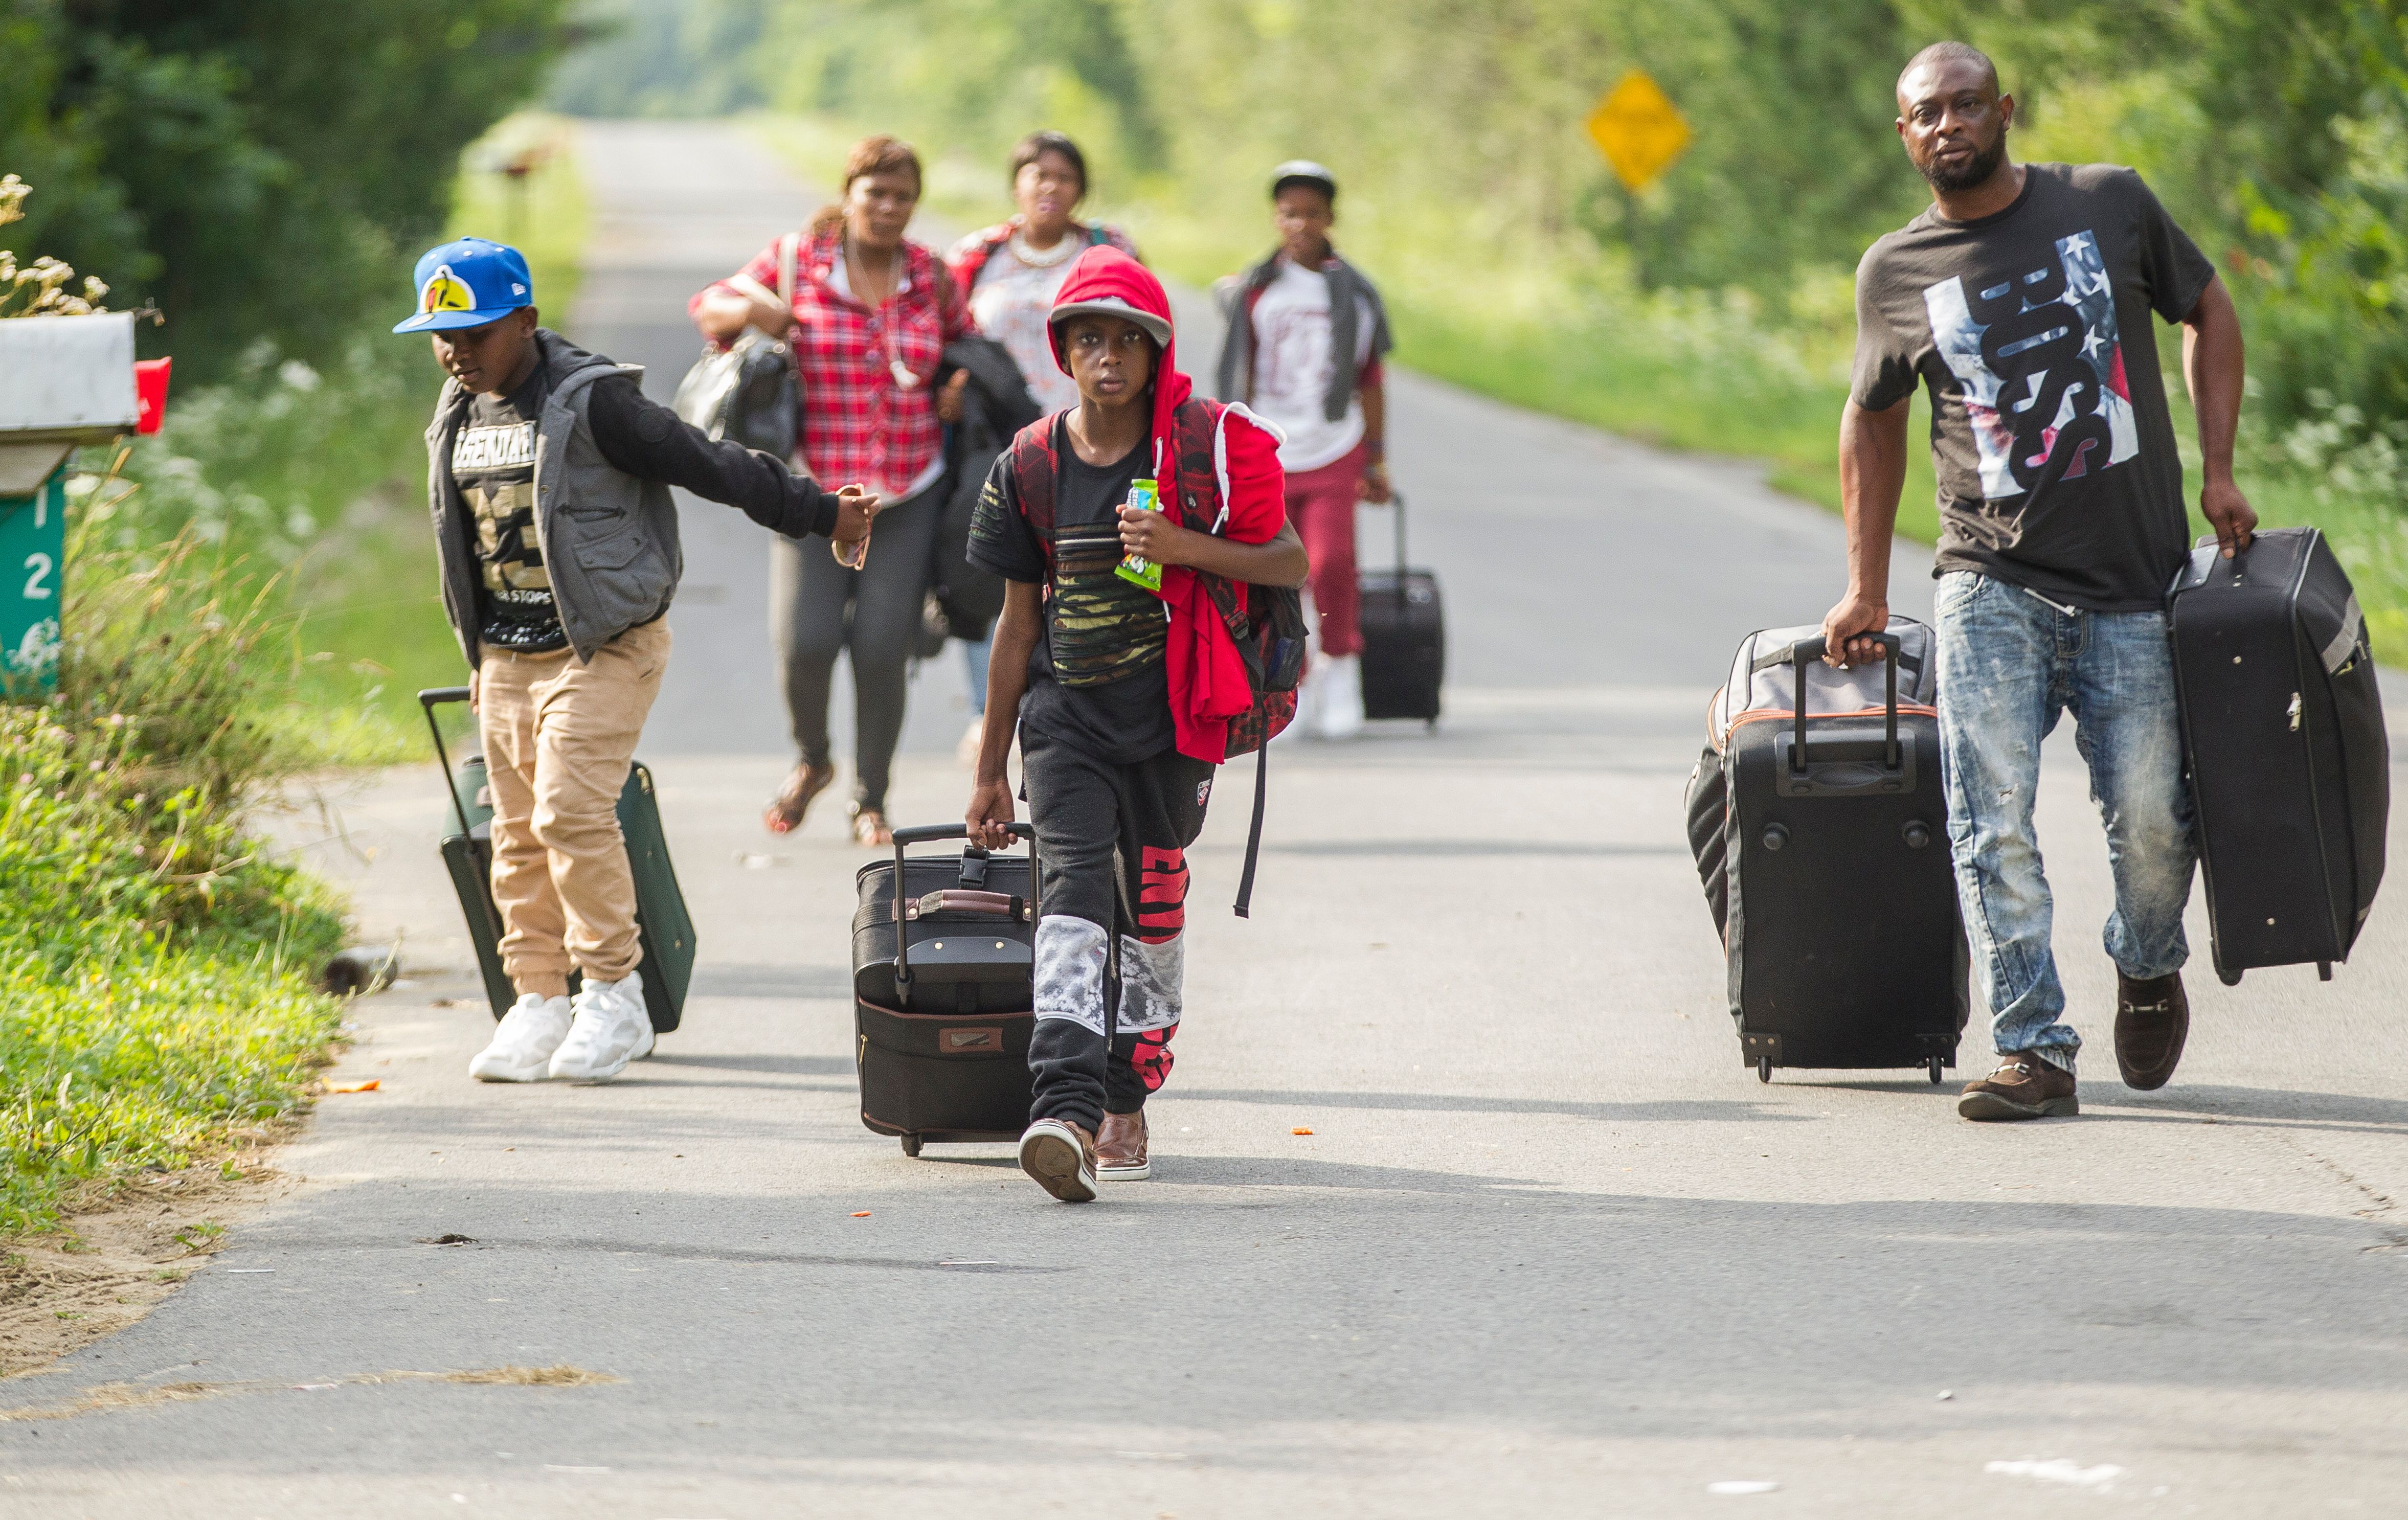 TOPSHOT - A group of people who claimed to be from Haiti walk down Roxham road in Champlain, New York as they prepare to cross the border into Canada illegally on August 4, 2017. Migrants have been crossing the border in greater numbers in recent weeks. / AFP PHOTO / Geoff Robins (Photo credit should read GEOFF ROBINS/AFP/Getty Images)